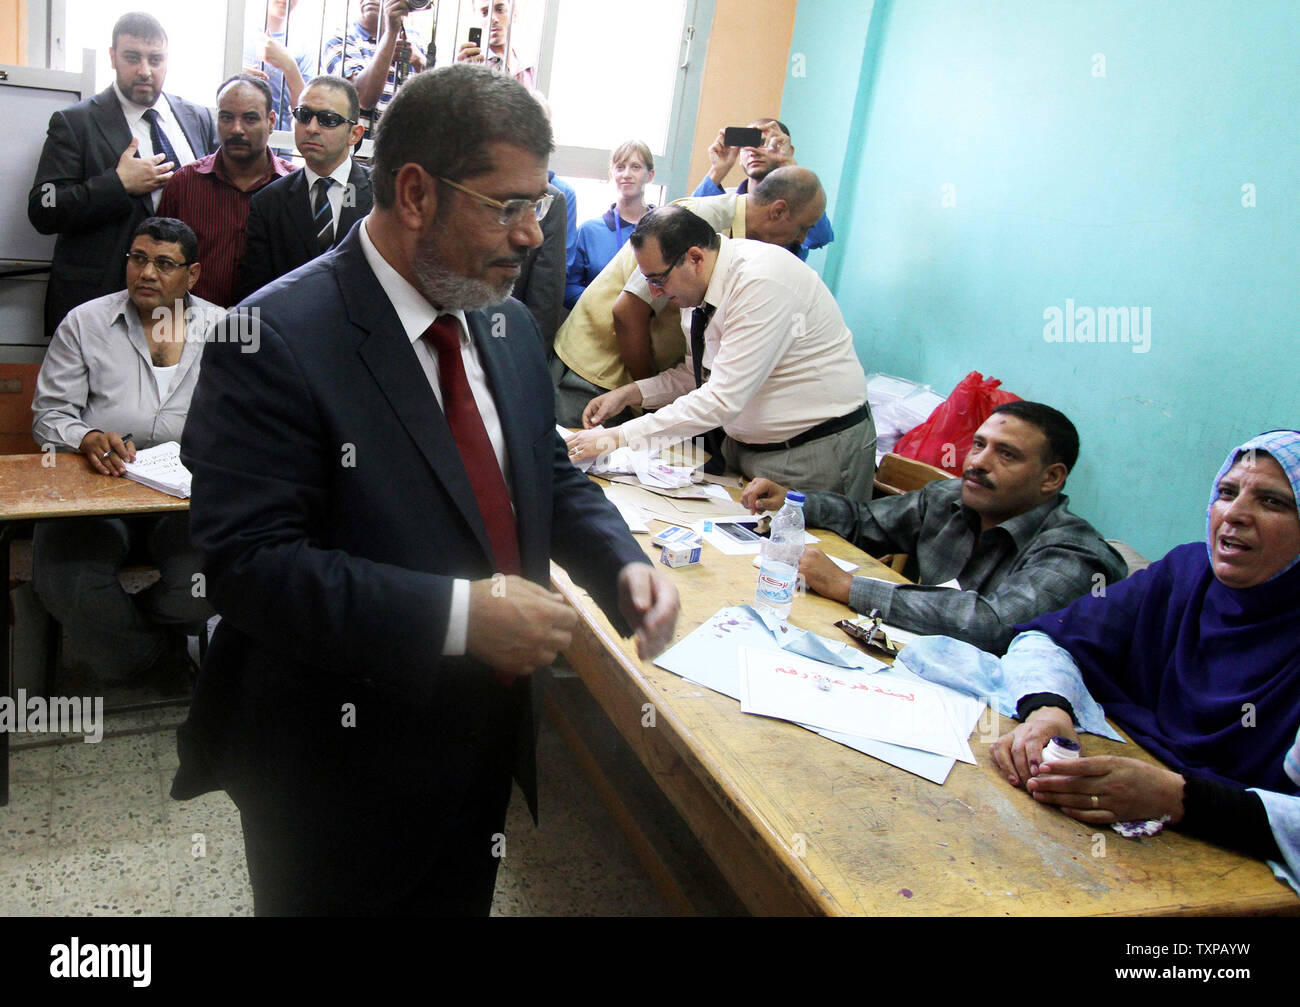 Presidential candidate Mohamed Morsy of the Muslim Brotherhood arrives to cast his vote at a polling station in a school in Al-Sharqya, 60 km (37 miles) northeast of Cairo in Egypt, June 16, 2012. Egypt's first free presidential election concludes this weekend in a run-off between the Muslim Brotherhood's candidate Mohamed Morsy and Ahmed Shafik, the last prime minister of ousted leader Hosni Mubarak. UPI/Ahmed Jomaa Stock Photo